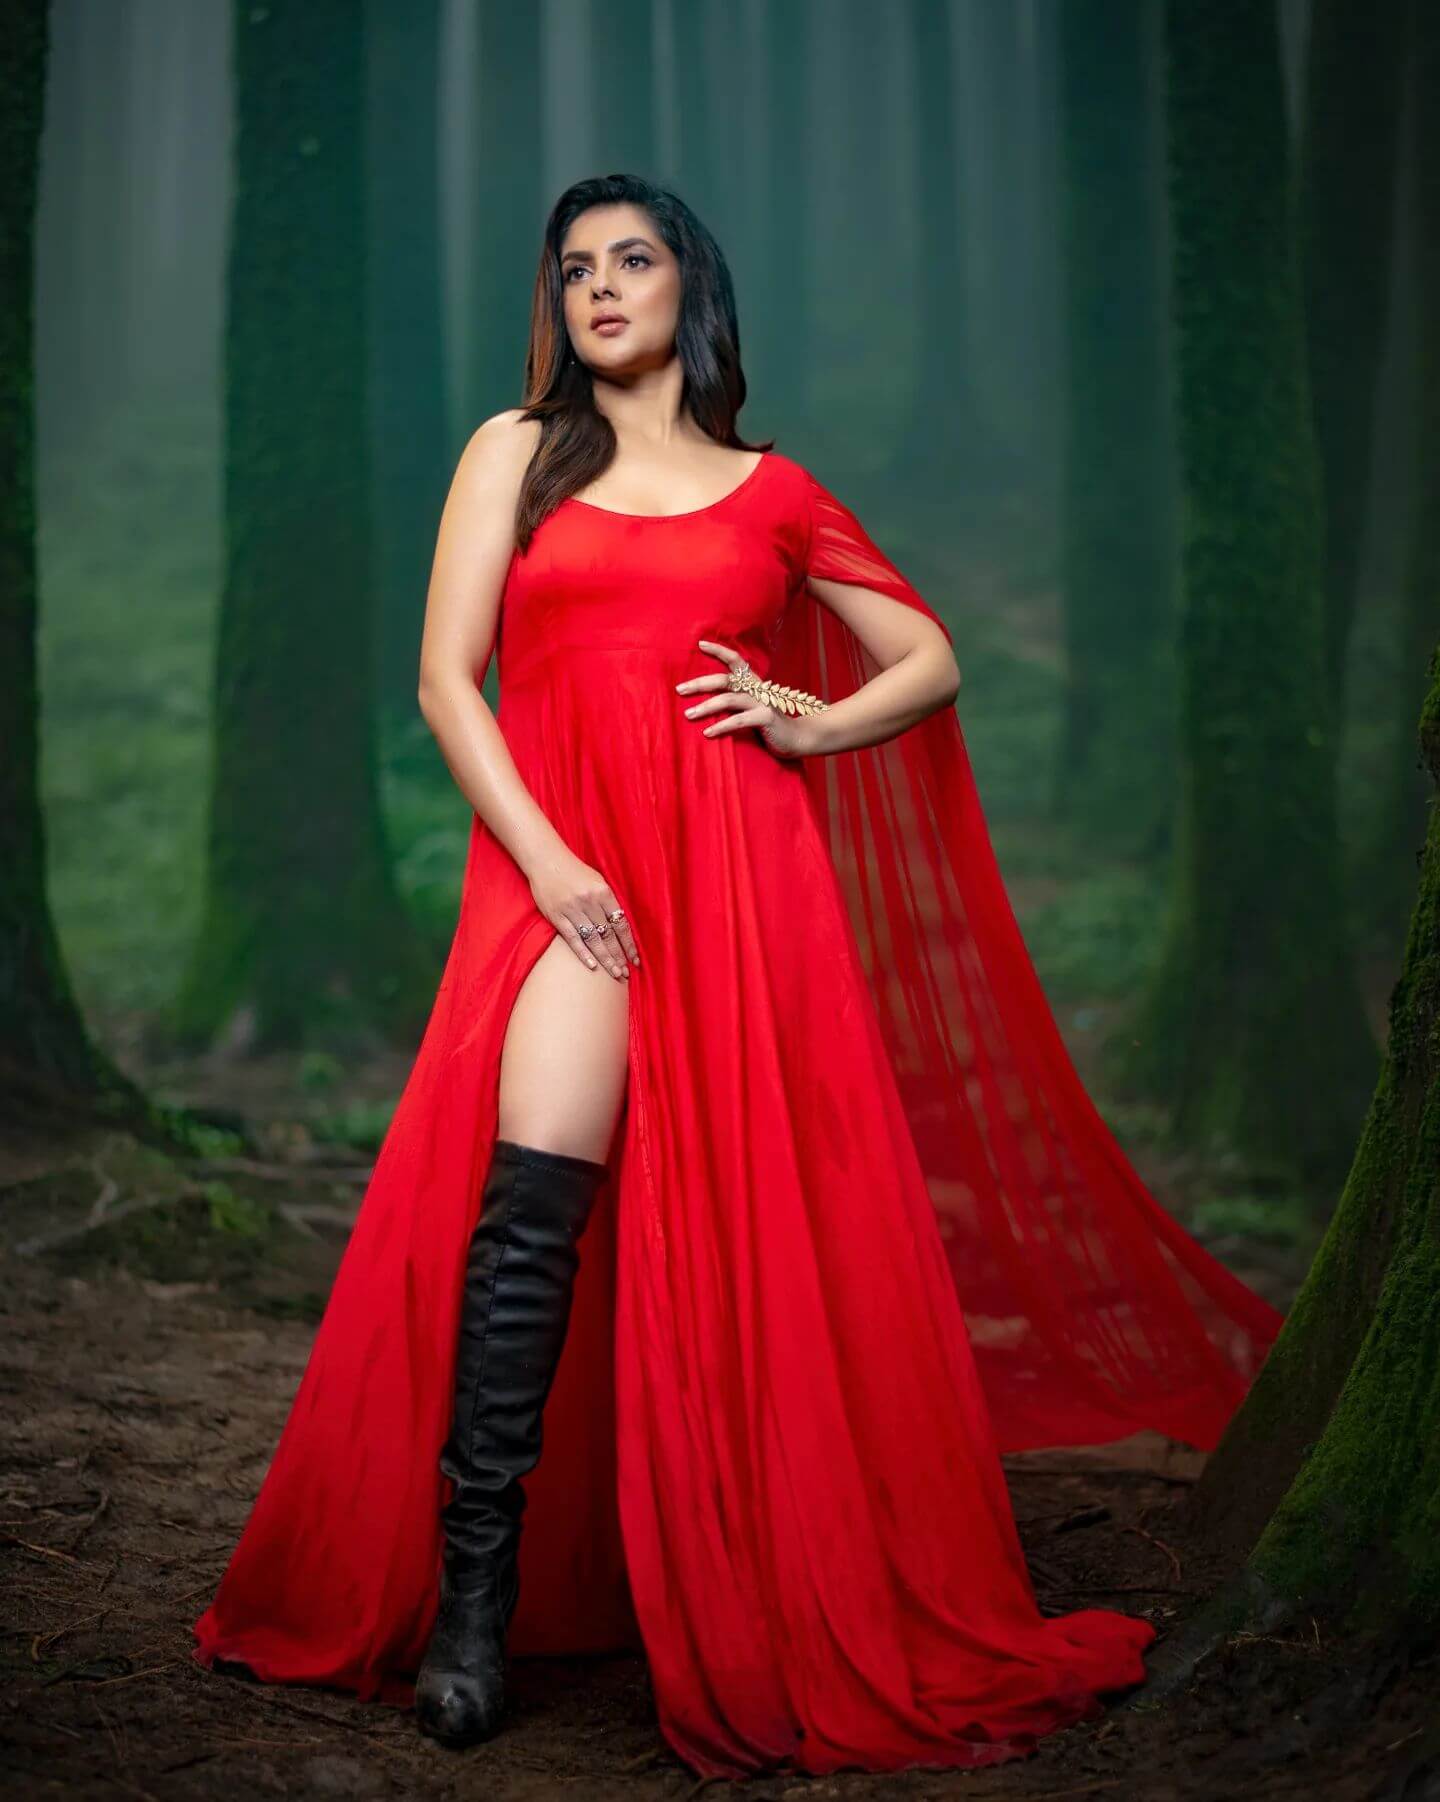 Actress Payel Sarkar in sexy red gown